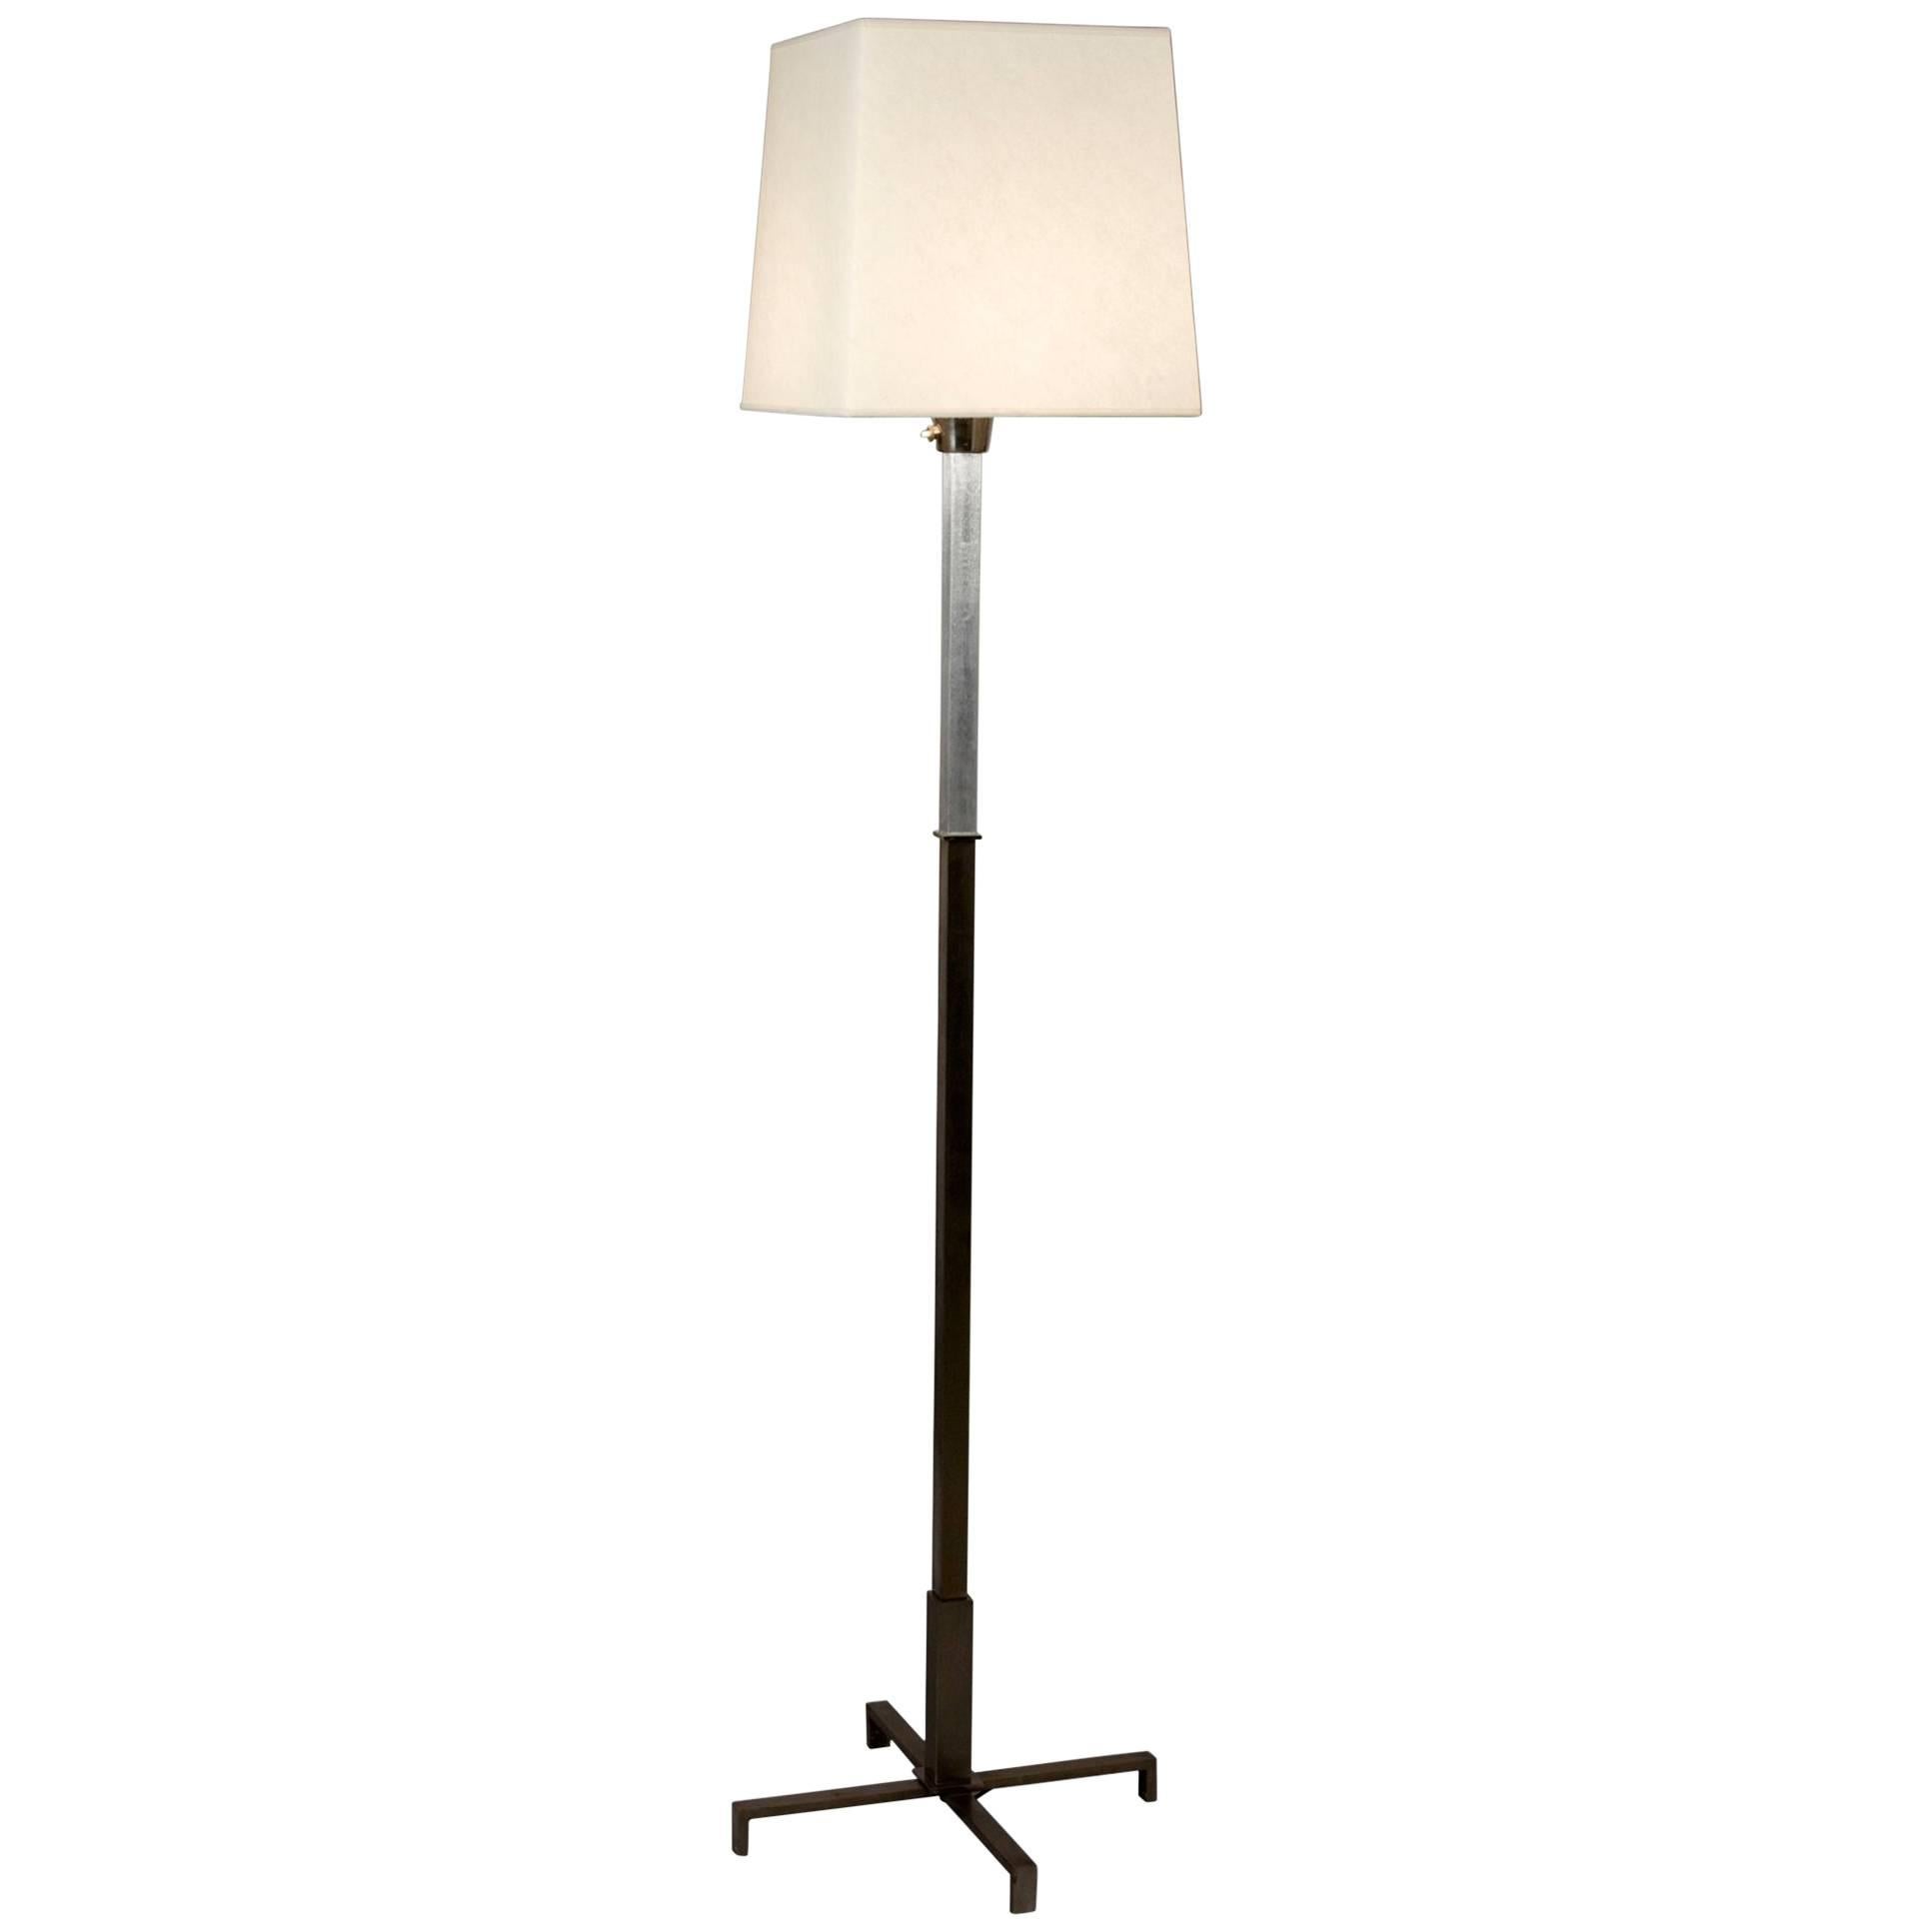 Cruciform Steel Floor Lamp, French, circa 1970 For Sale